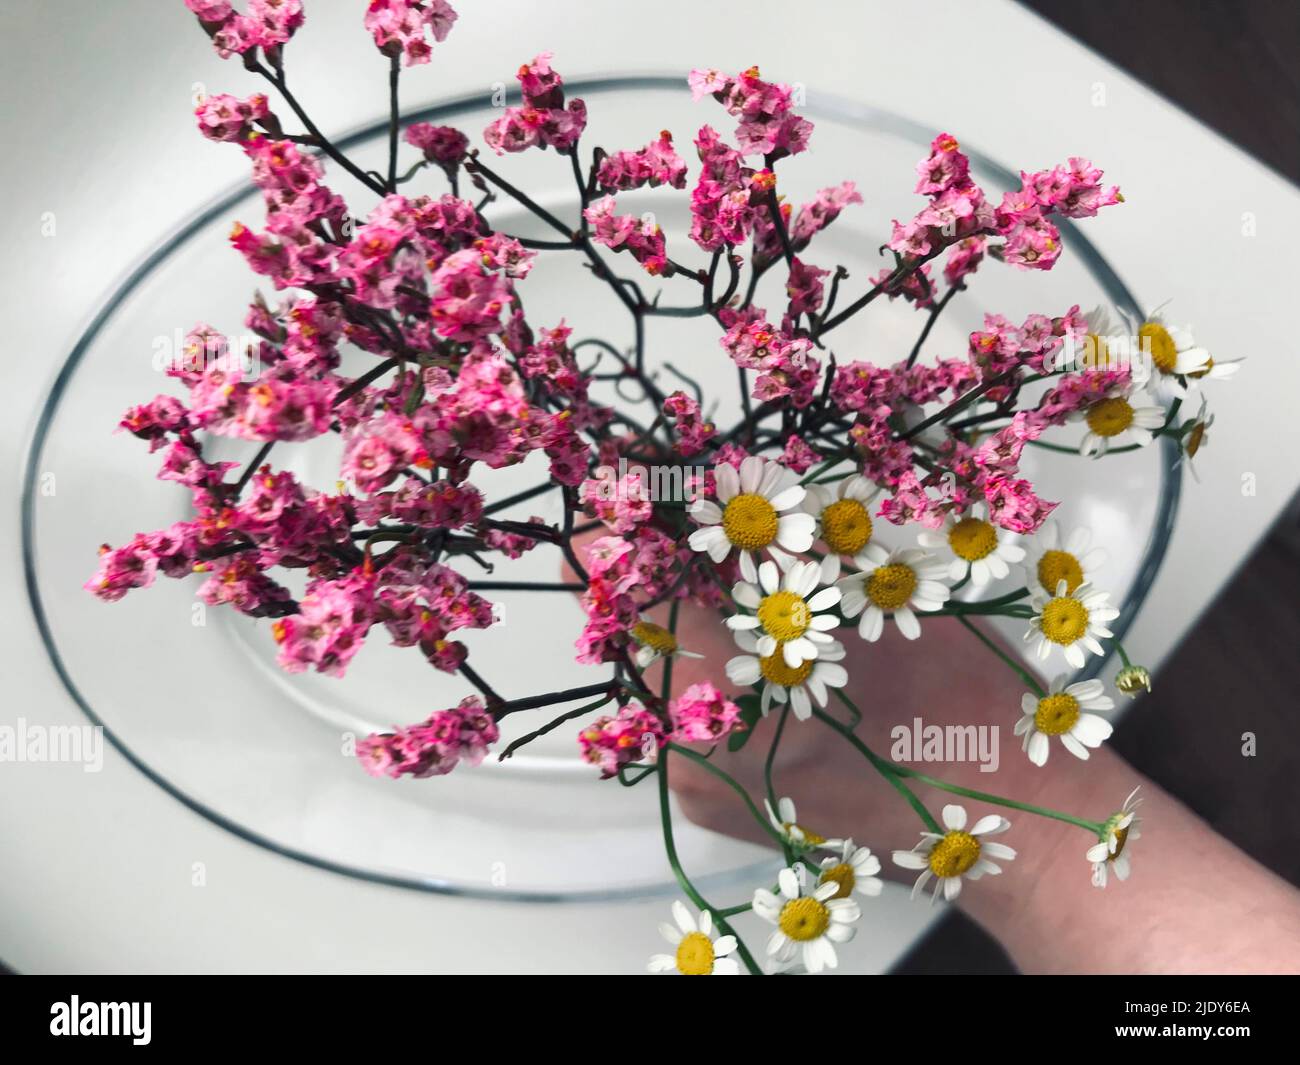 Limonium and chamomile on glass plate Stock Photo